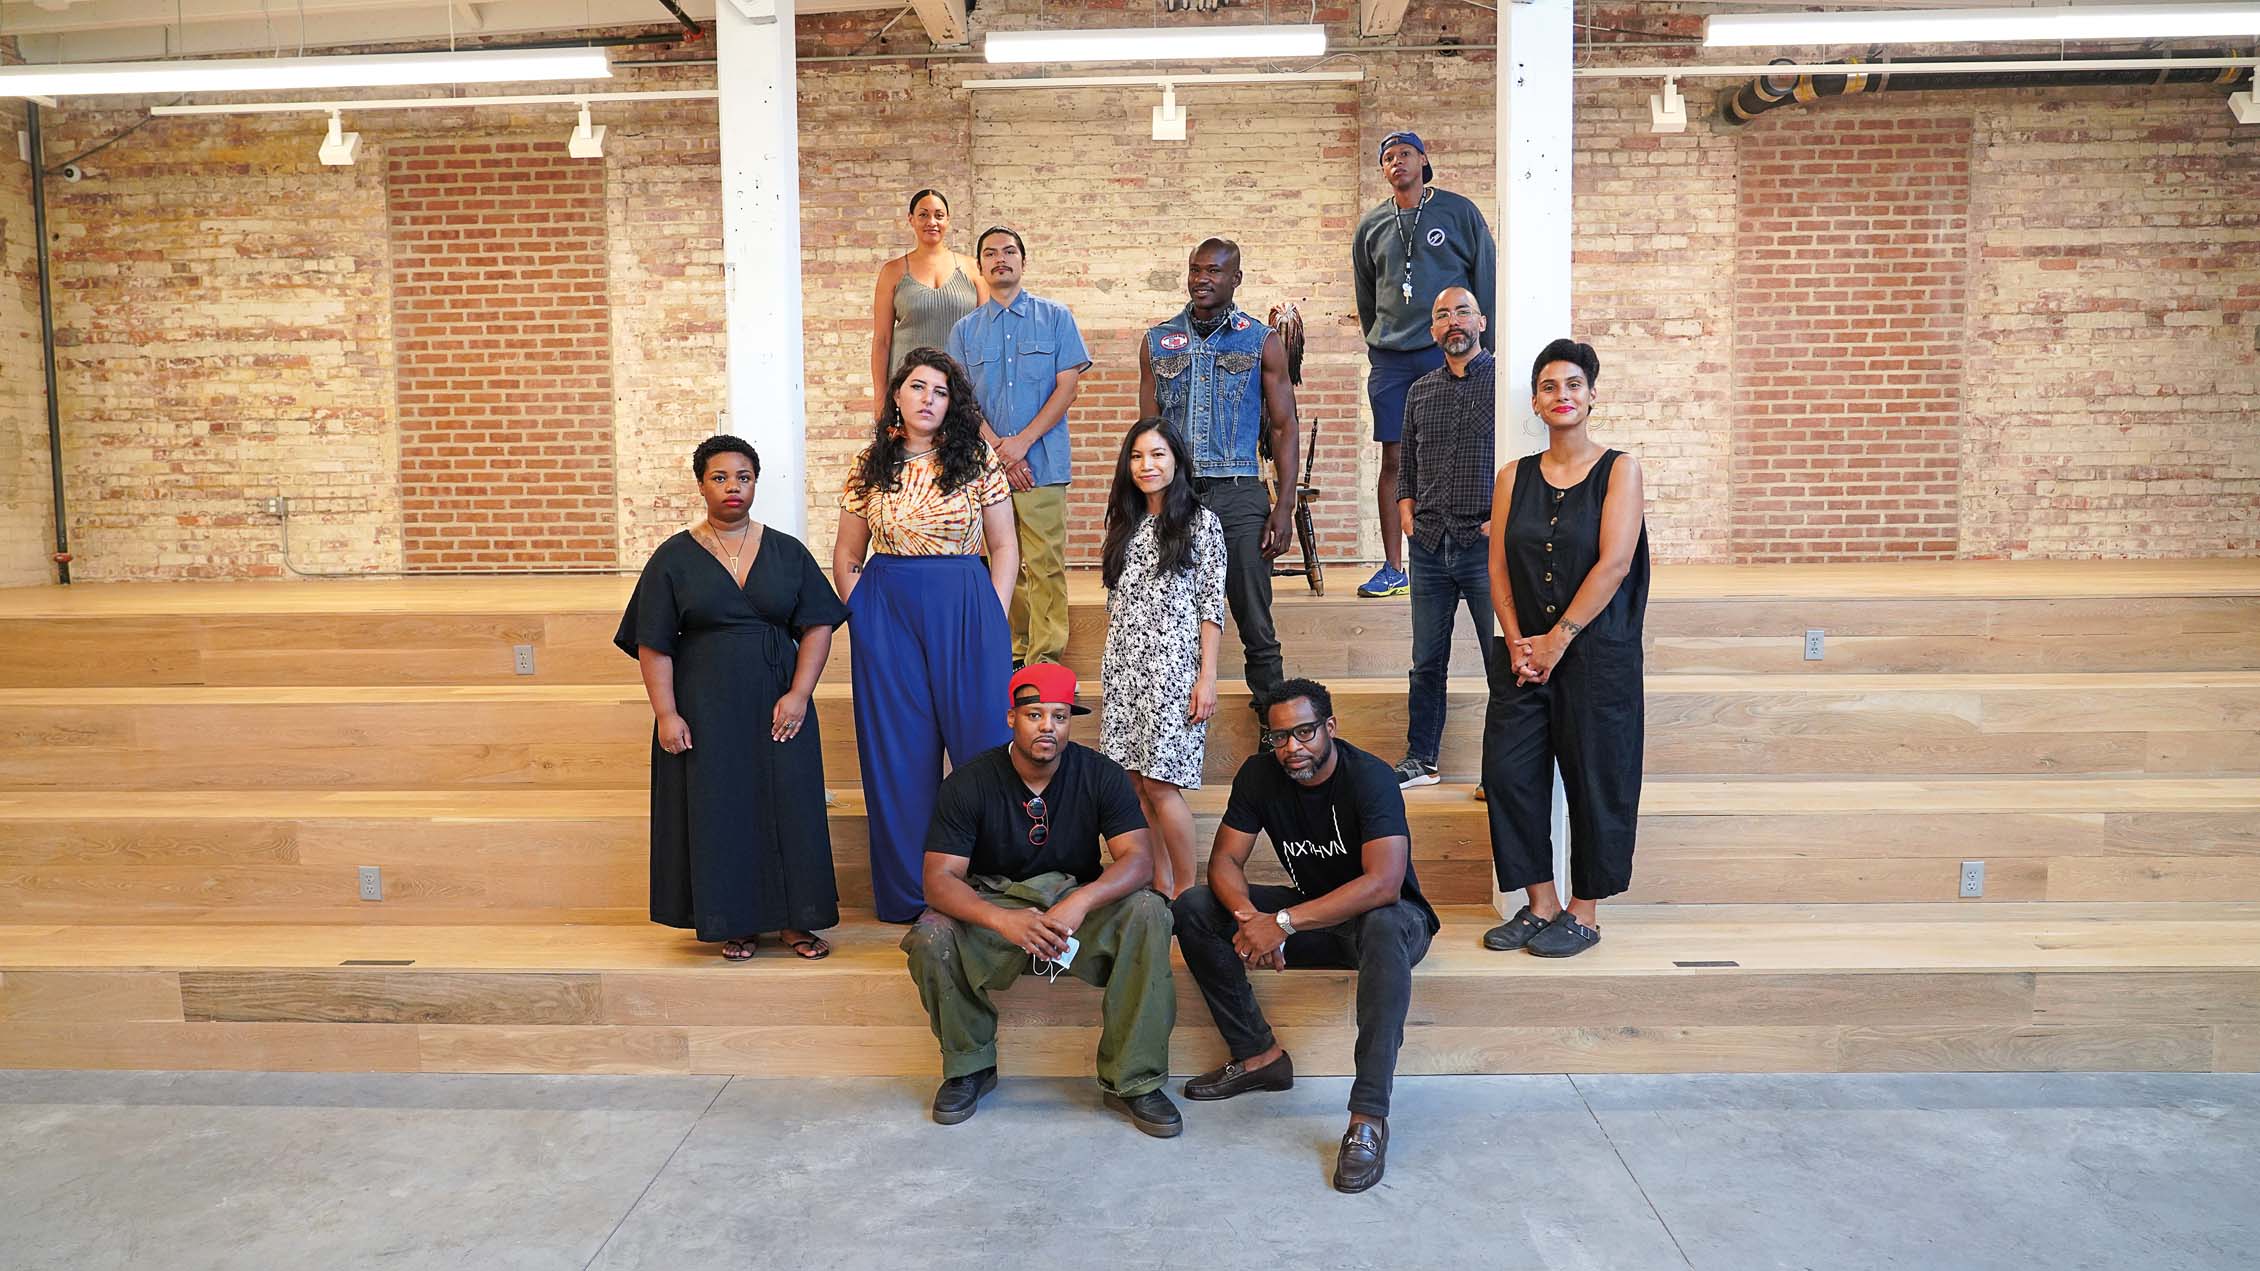 Current 2020 NXTHVN residents. From left to right. Front row, seated: Titus Kaphar and Jason Price second row: Allana Clarke, Ilana Savdie, Michelle Phương Ting, Alisa Sikelianos- Carter third row: Esteban Ramón Pérez, Jeffrey Meris, Vincent Valdez top row: Nico Wheadon (executive director), a sculpture by Daniel T. Gaitor- Lomack, Terence Washington (program director). Not pictured: Daniel T. Gaitor-Lomack, Claire Kim.